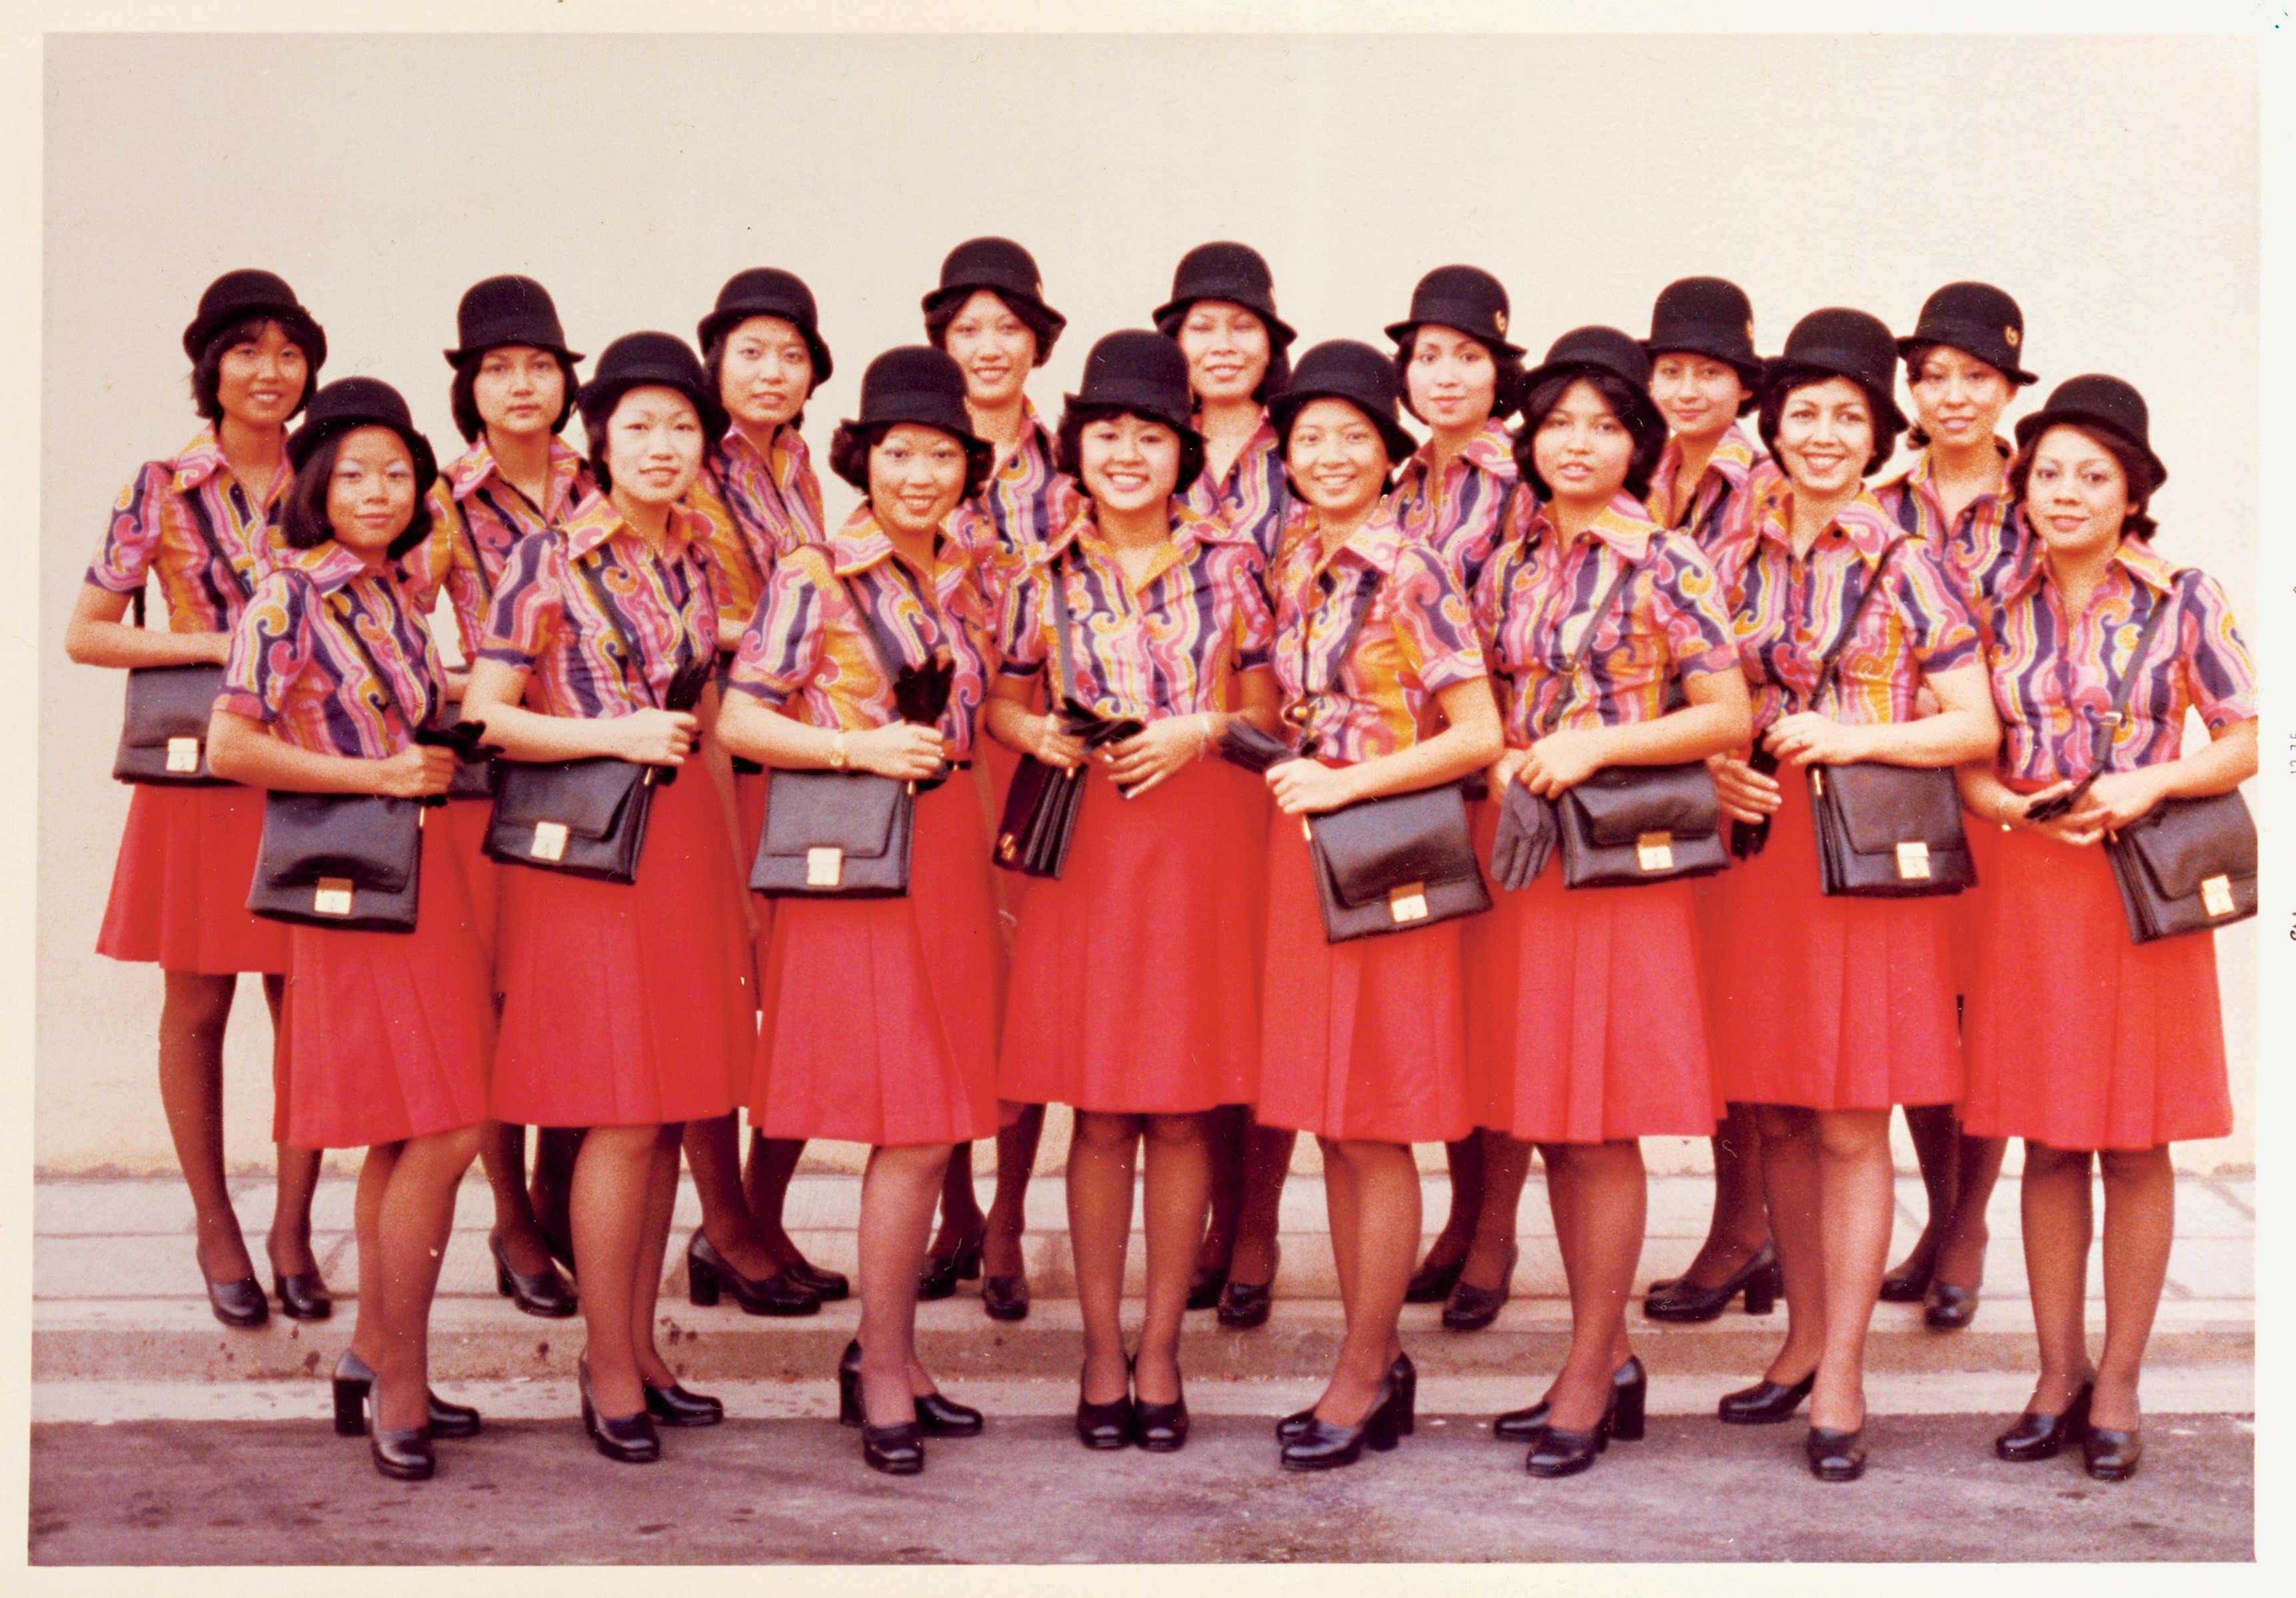 Becky Kwan (front row, far left) with Cathay Pacific colleagues in the late 1970s. Photo: Becky Kwan